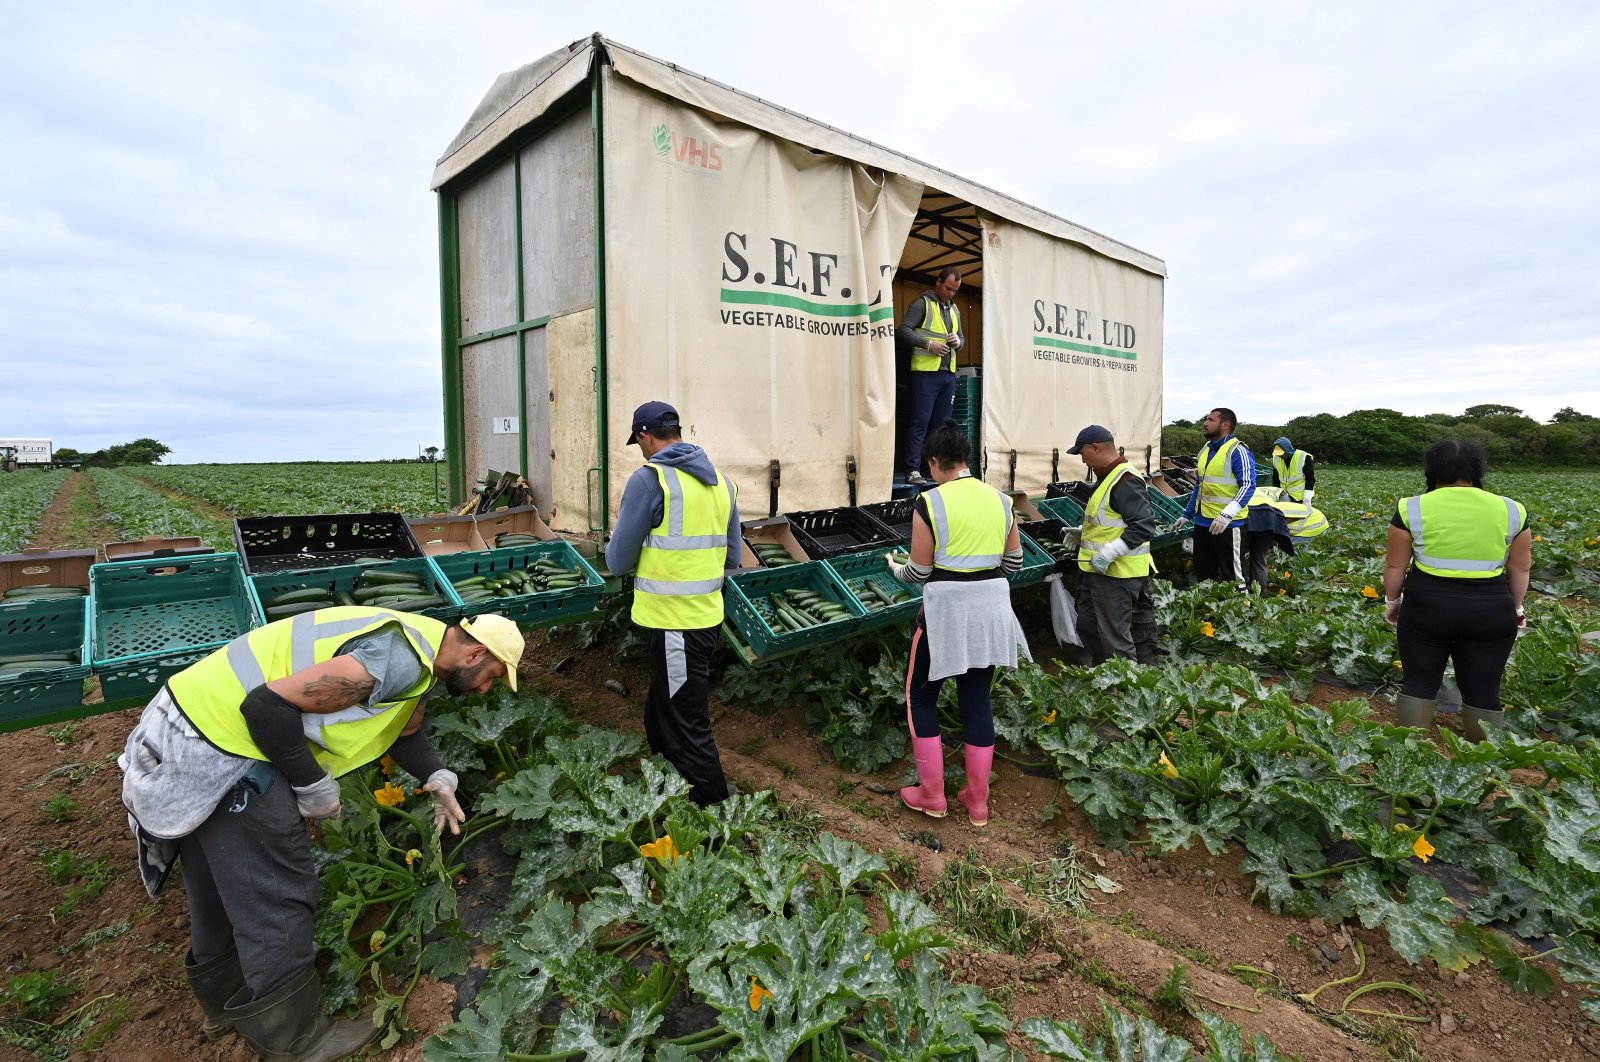 Vegetable pickers work to harvest zucchini at a farm in Hayle, Britain, June 13, 2022. (Reuters Photo)